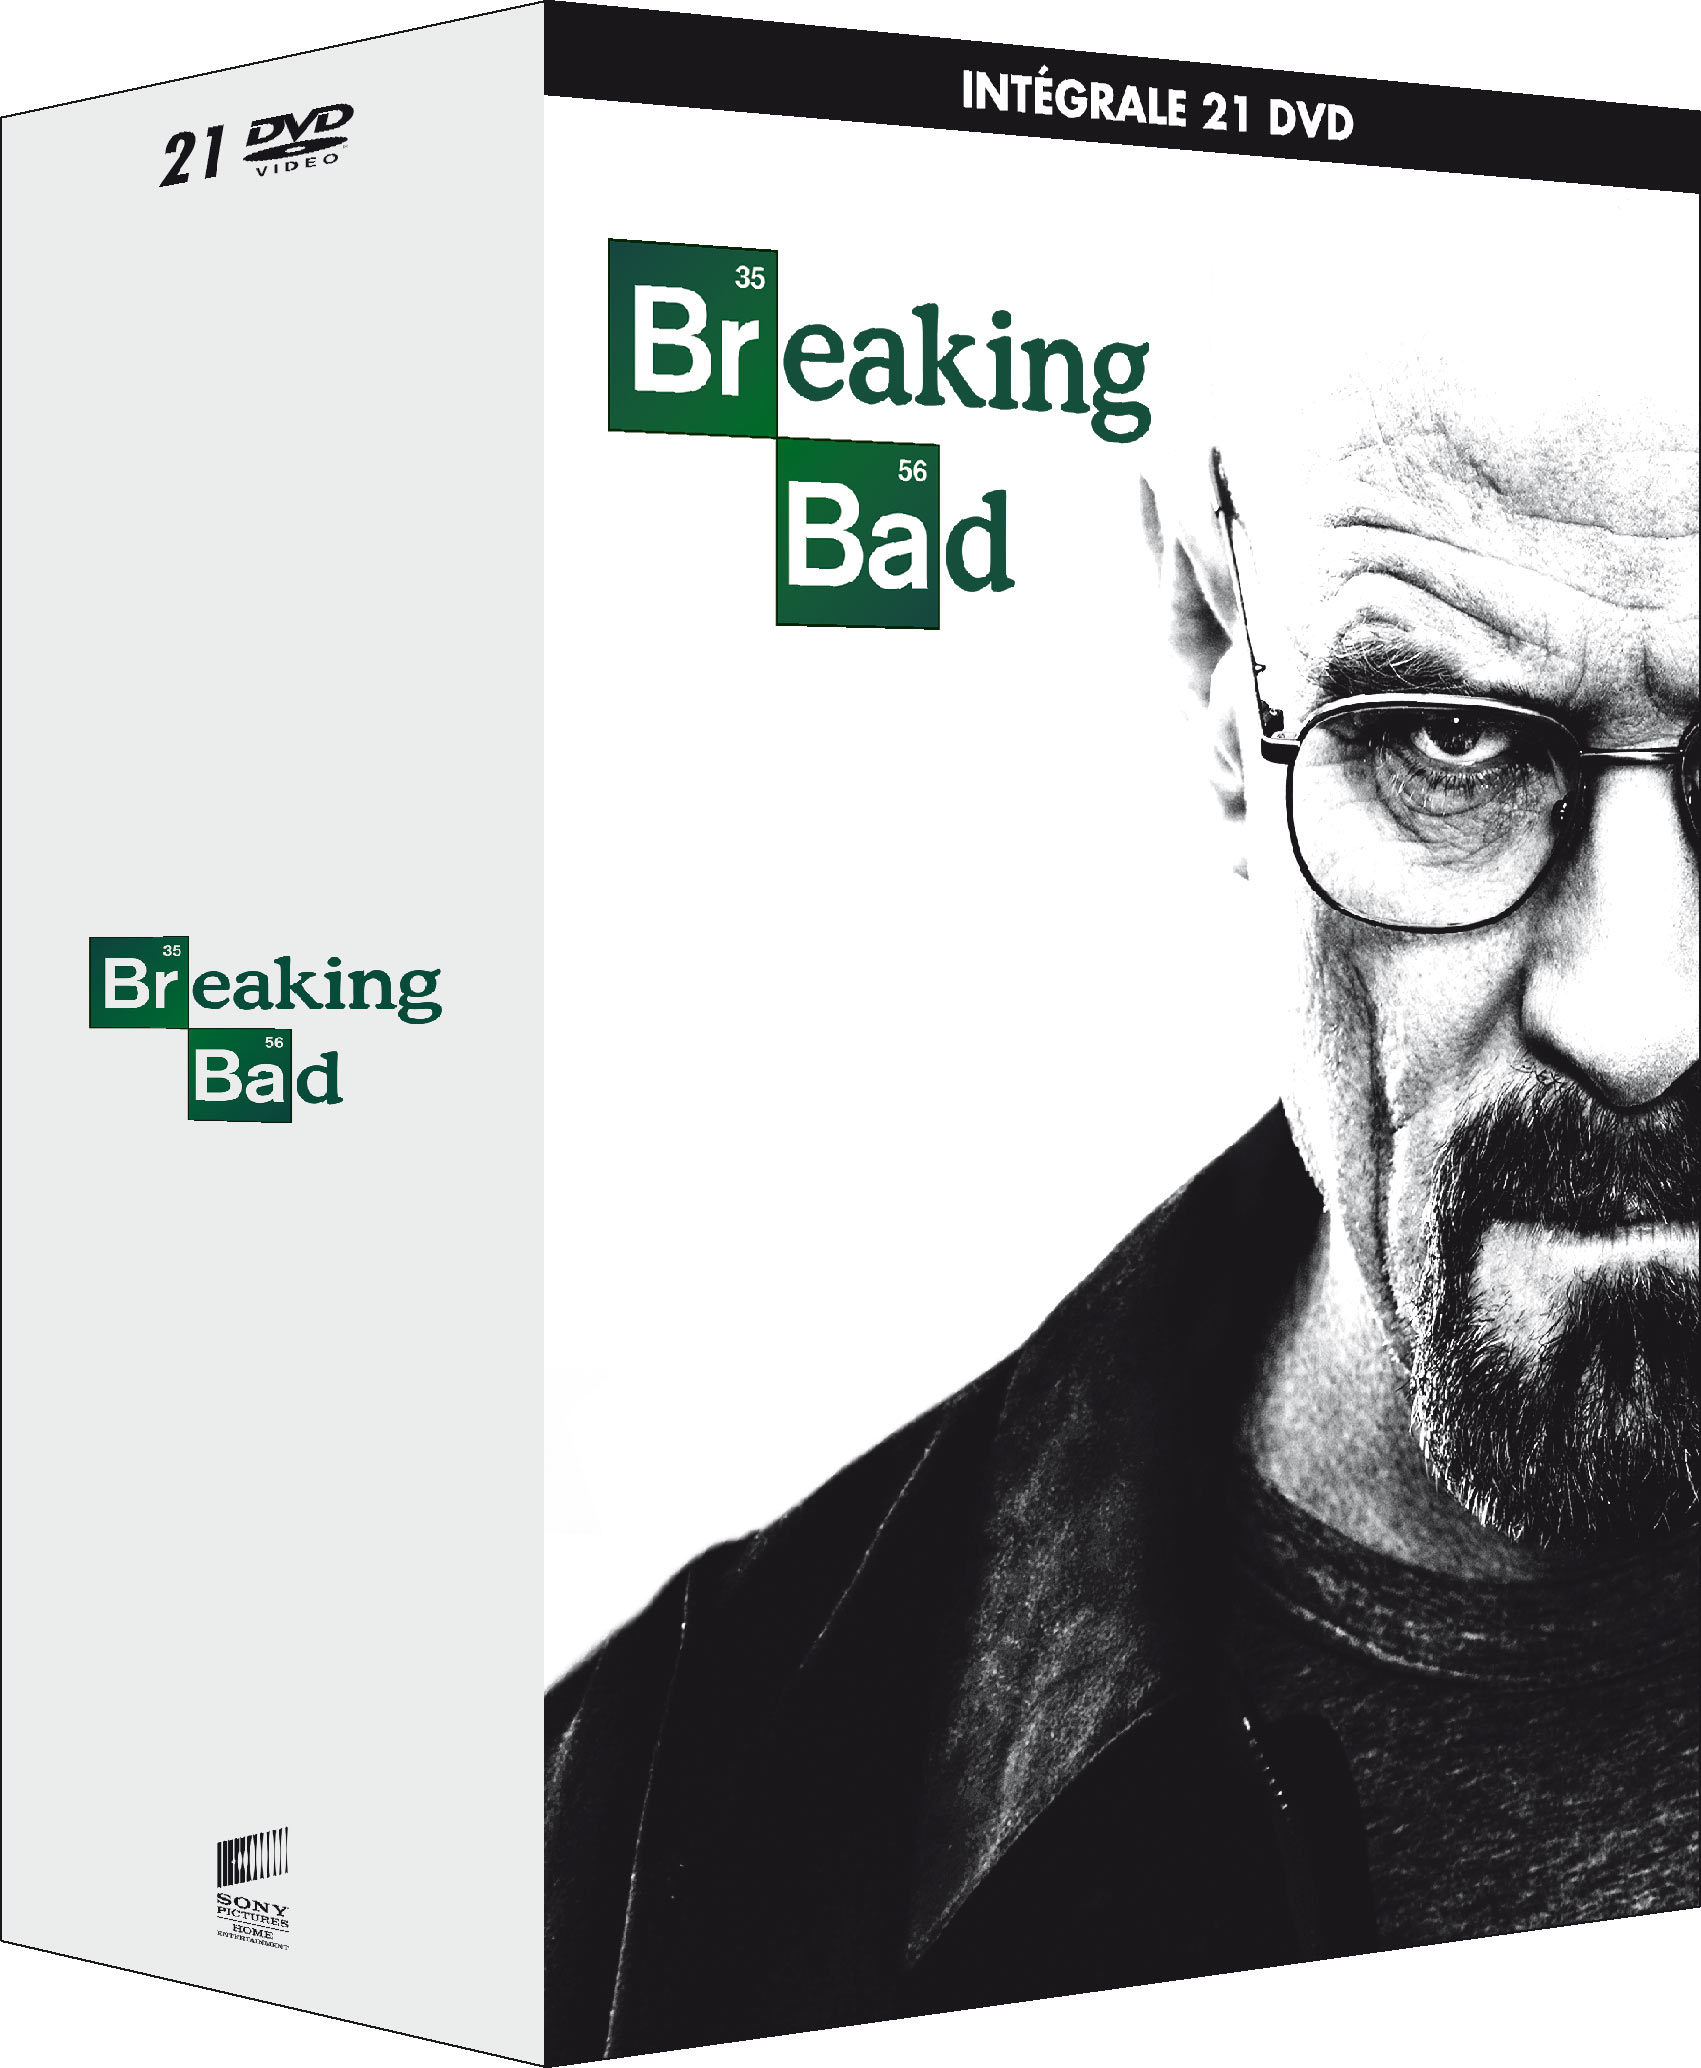 BREAKING BAD - INTEGRALE WALTER WHITE EDITION - SAISONS 1 A 5 - 21 DVD